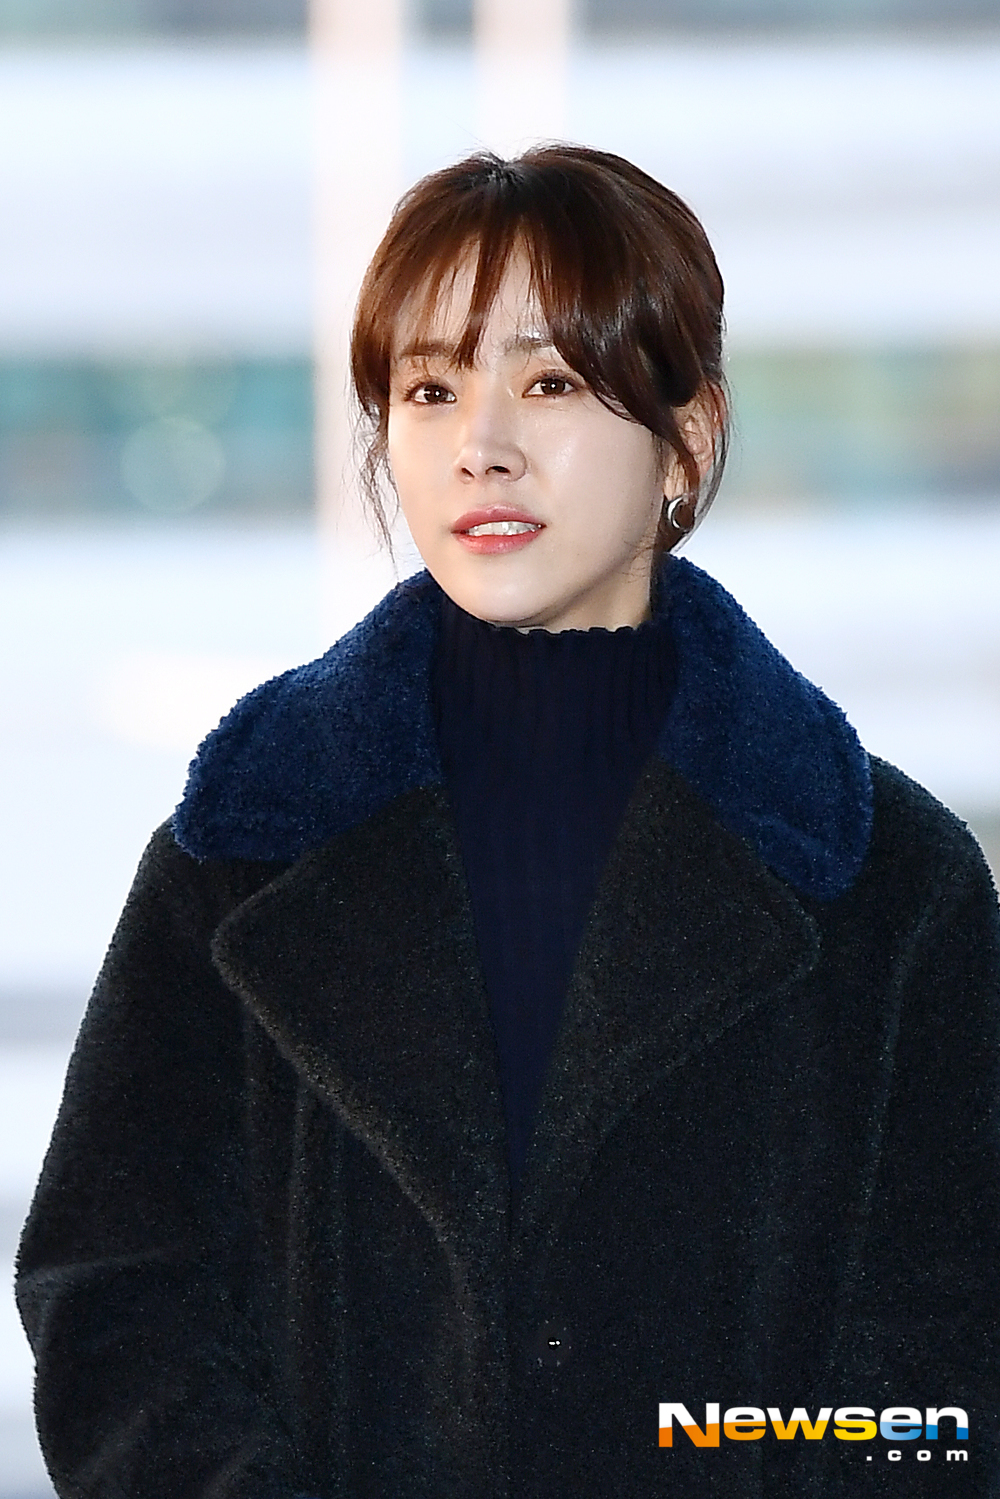 Actor Han Ji-min left for United States of America New York City on the afternoon of January 31 at the New York City Asian Film Festival (NYAFF) through the Incheon International Airport in Unseo-dong, Jung-gu, Incheon.Actor Han Ji-min is leaving for United States of America New York City with an airport fashion.exponential earthquake